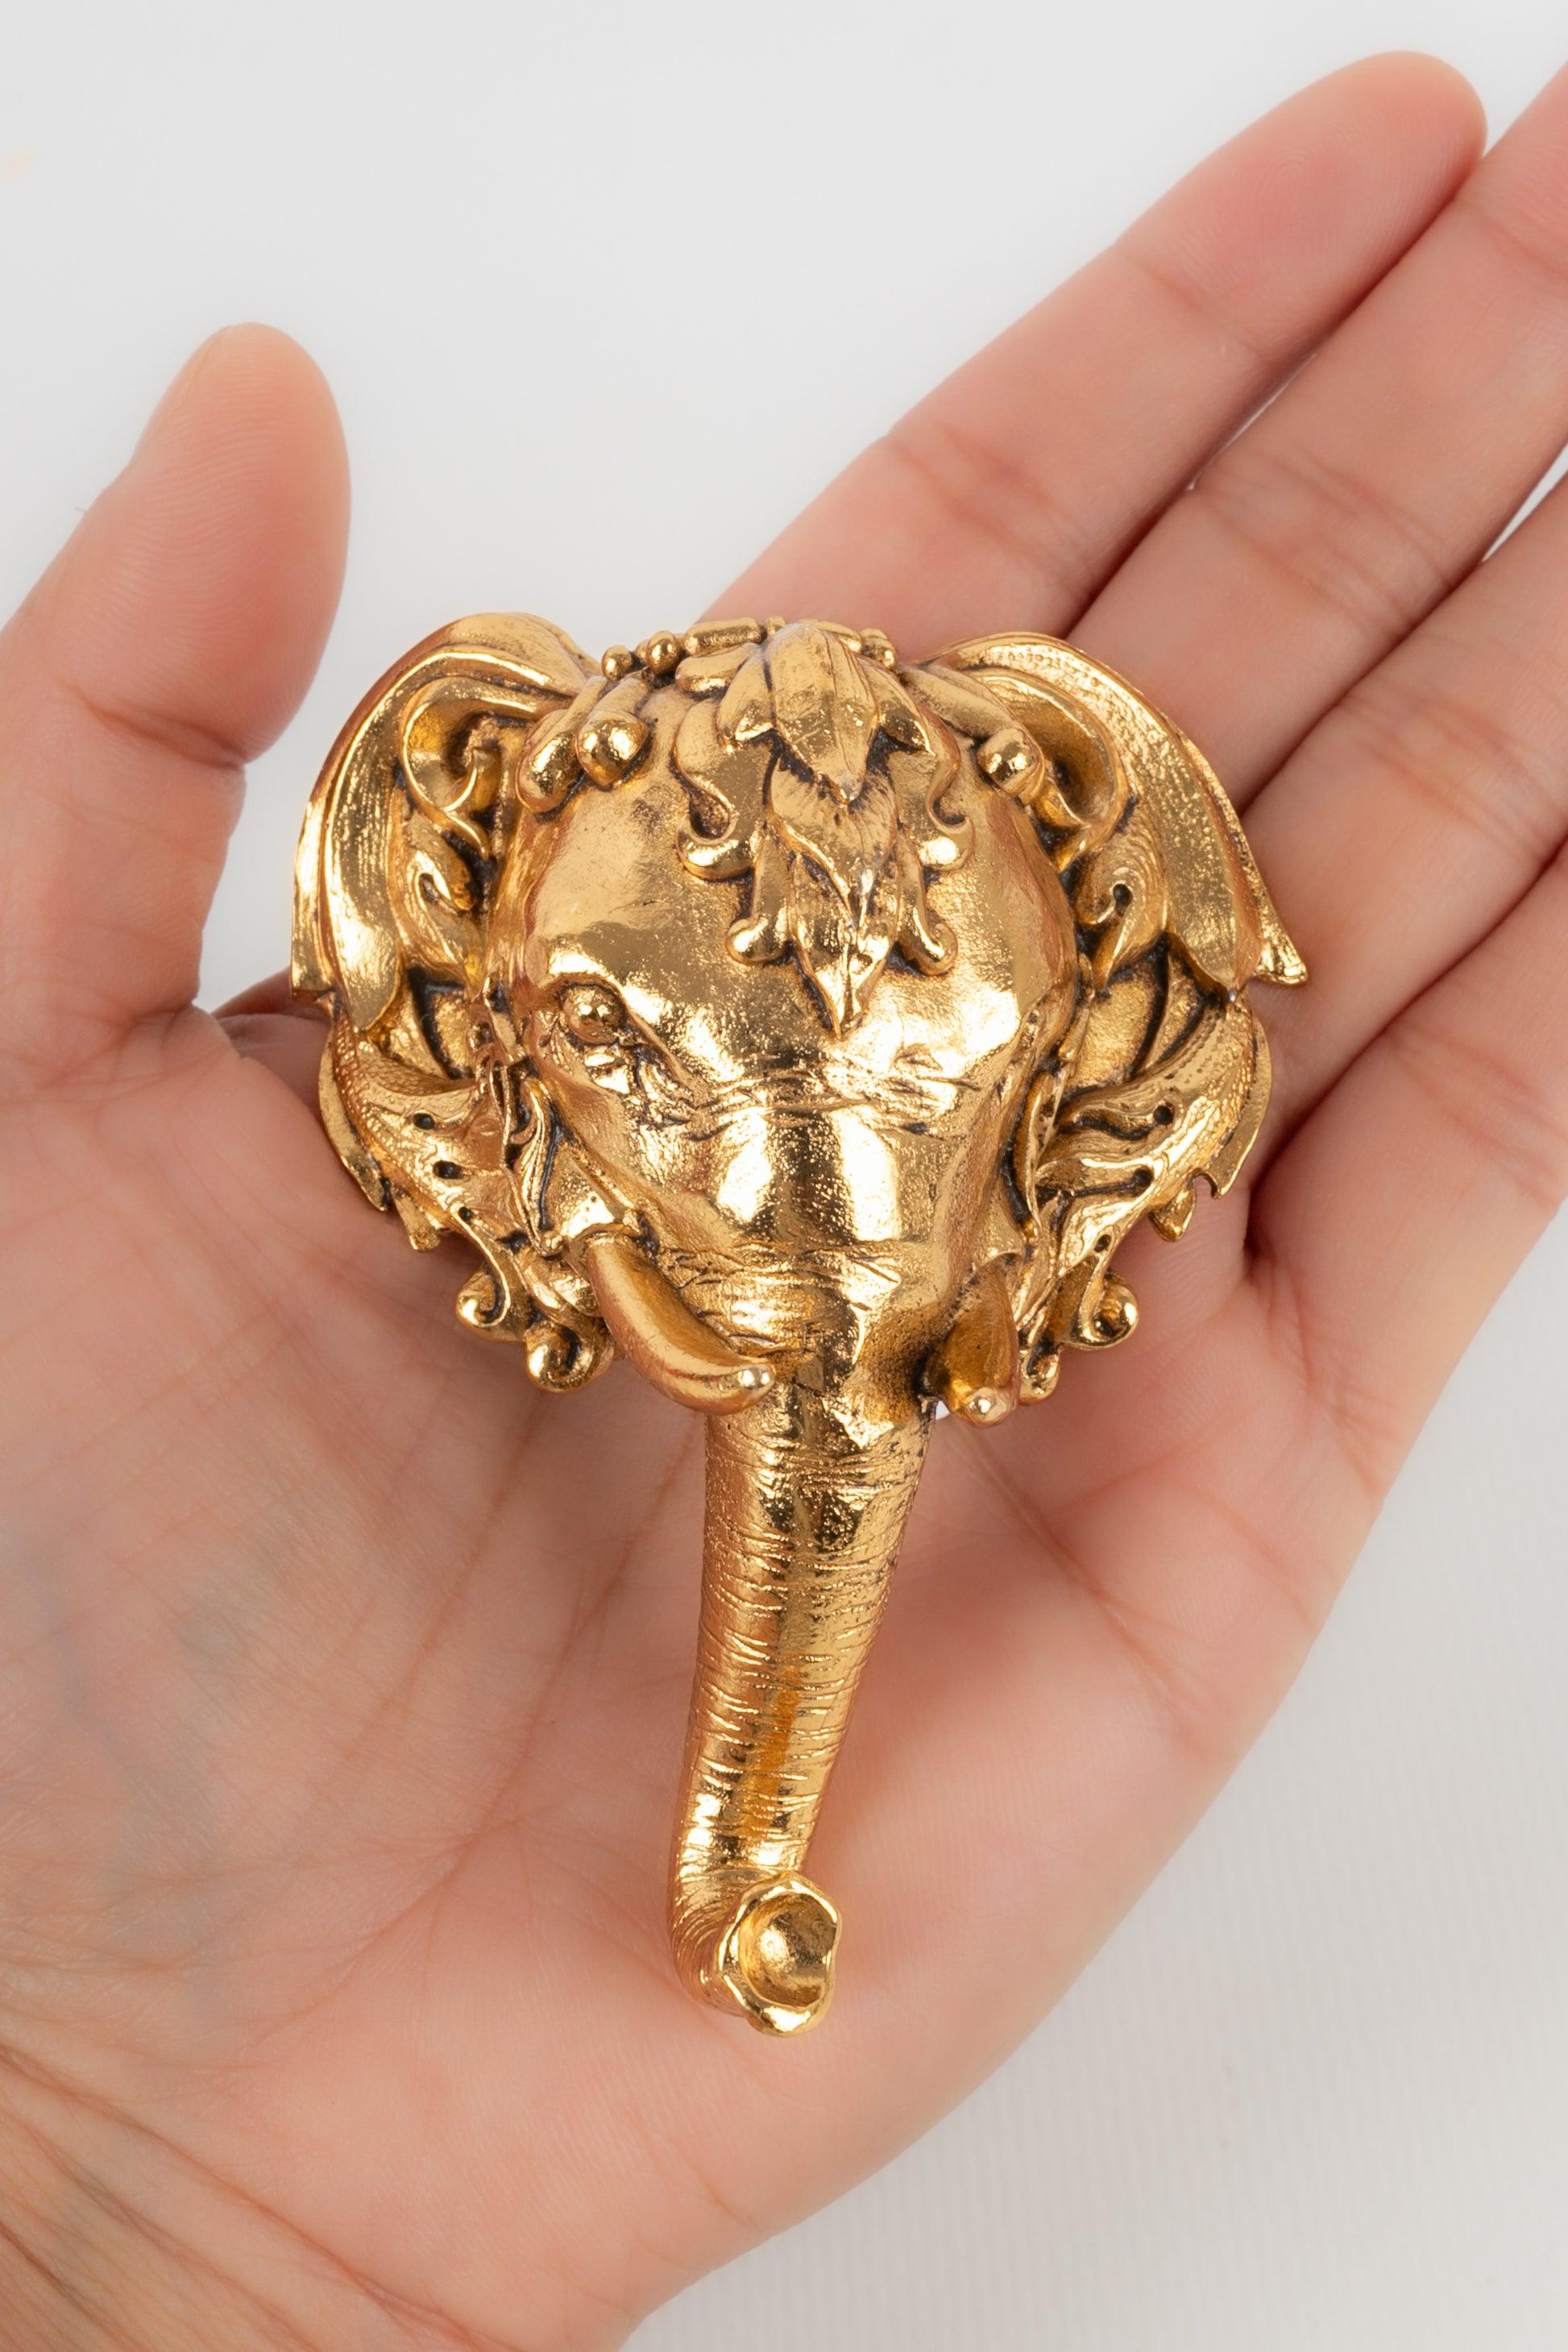 Christian Dior - Gold-plated metal pendant brooch depicting an elephant head

Additional information:
Condition: Very good condition
Dimensions: Height: 9 cm

Seller Reference: BR44
